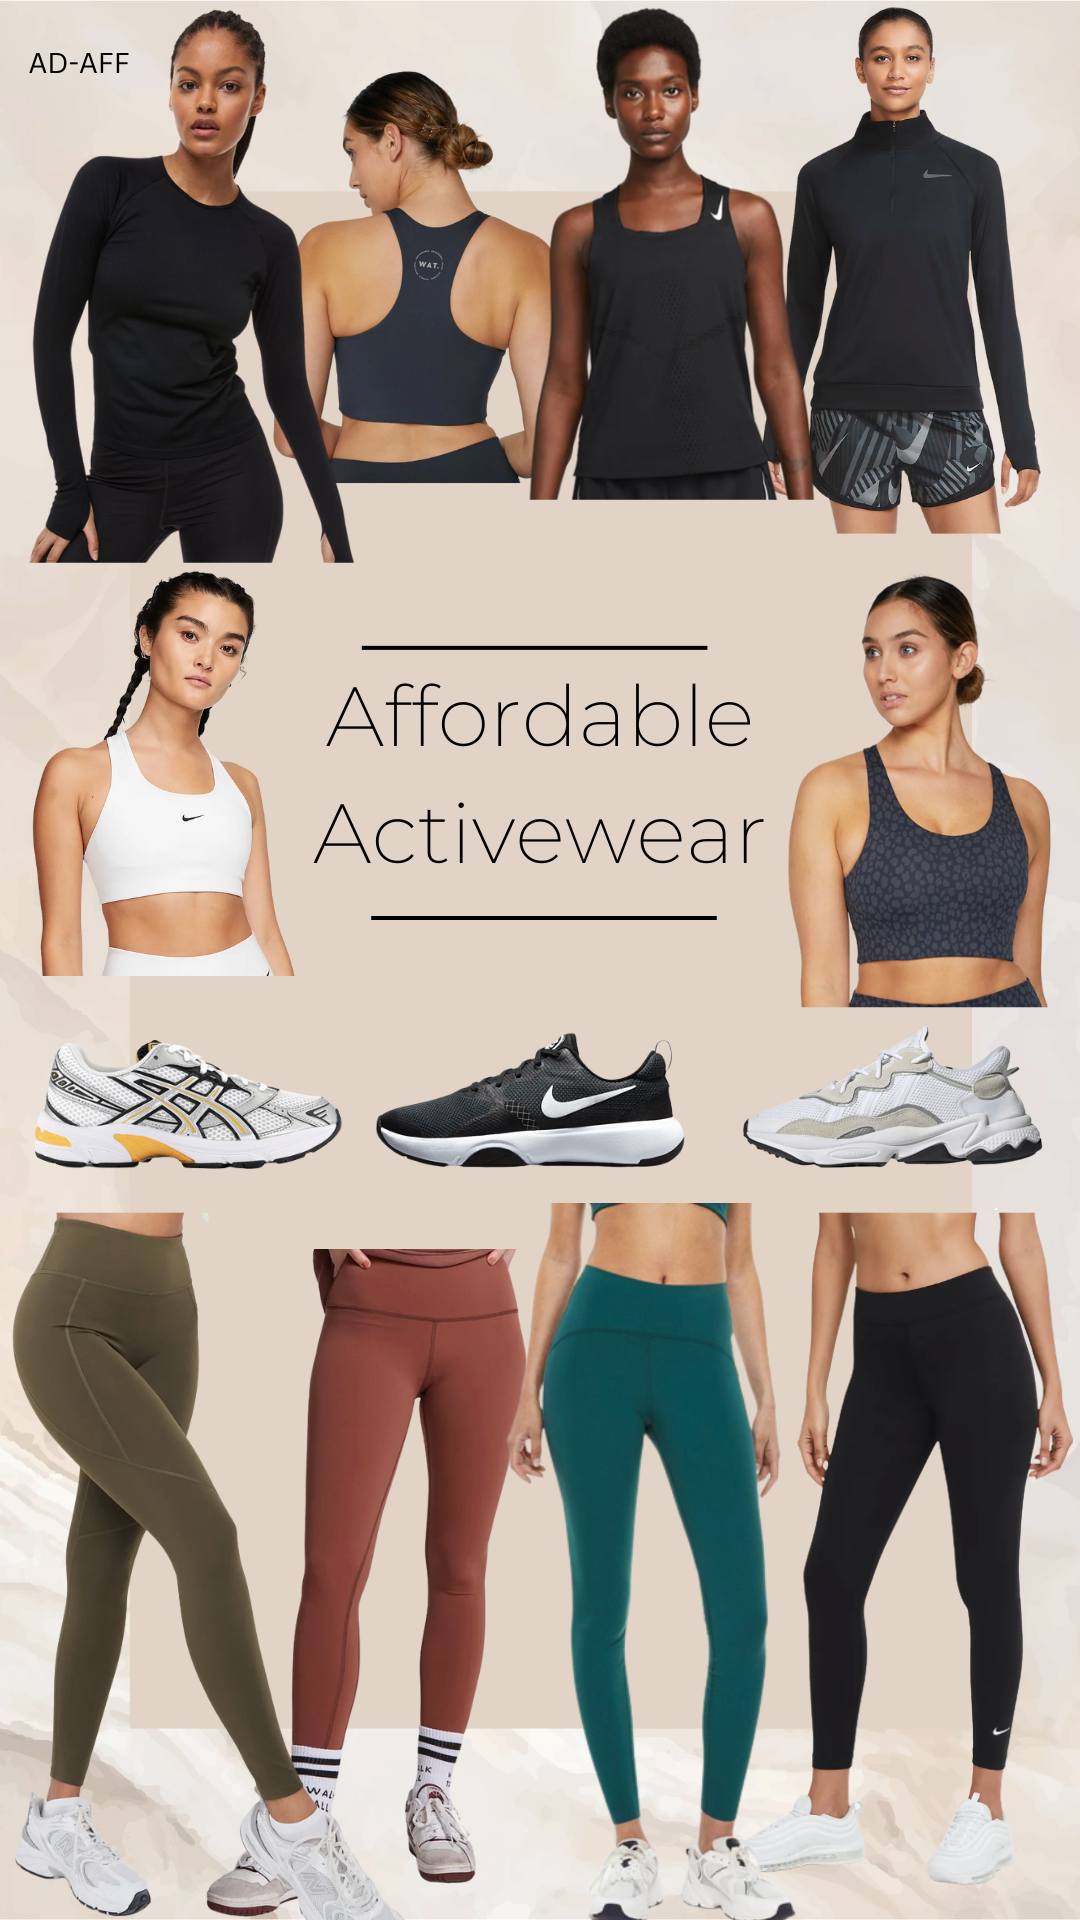 AFFORDABLE ACTIVEWEAR ON OUR RADAR